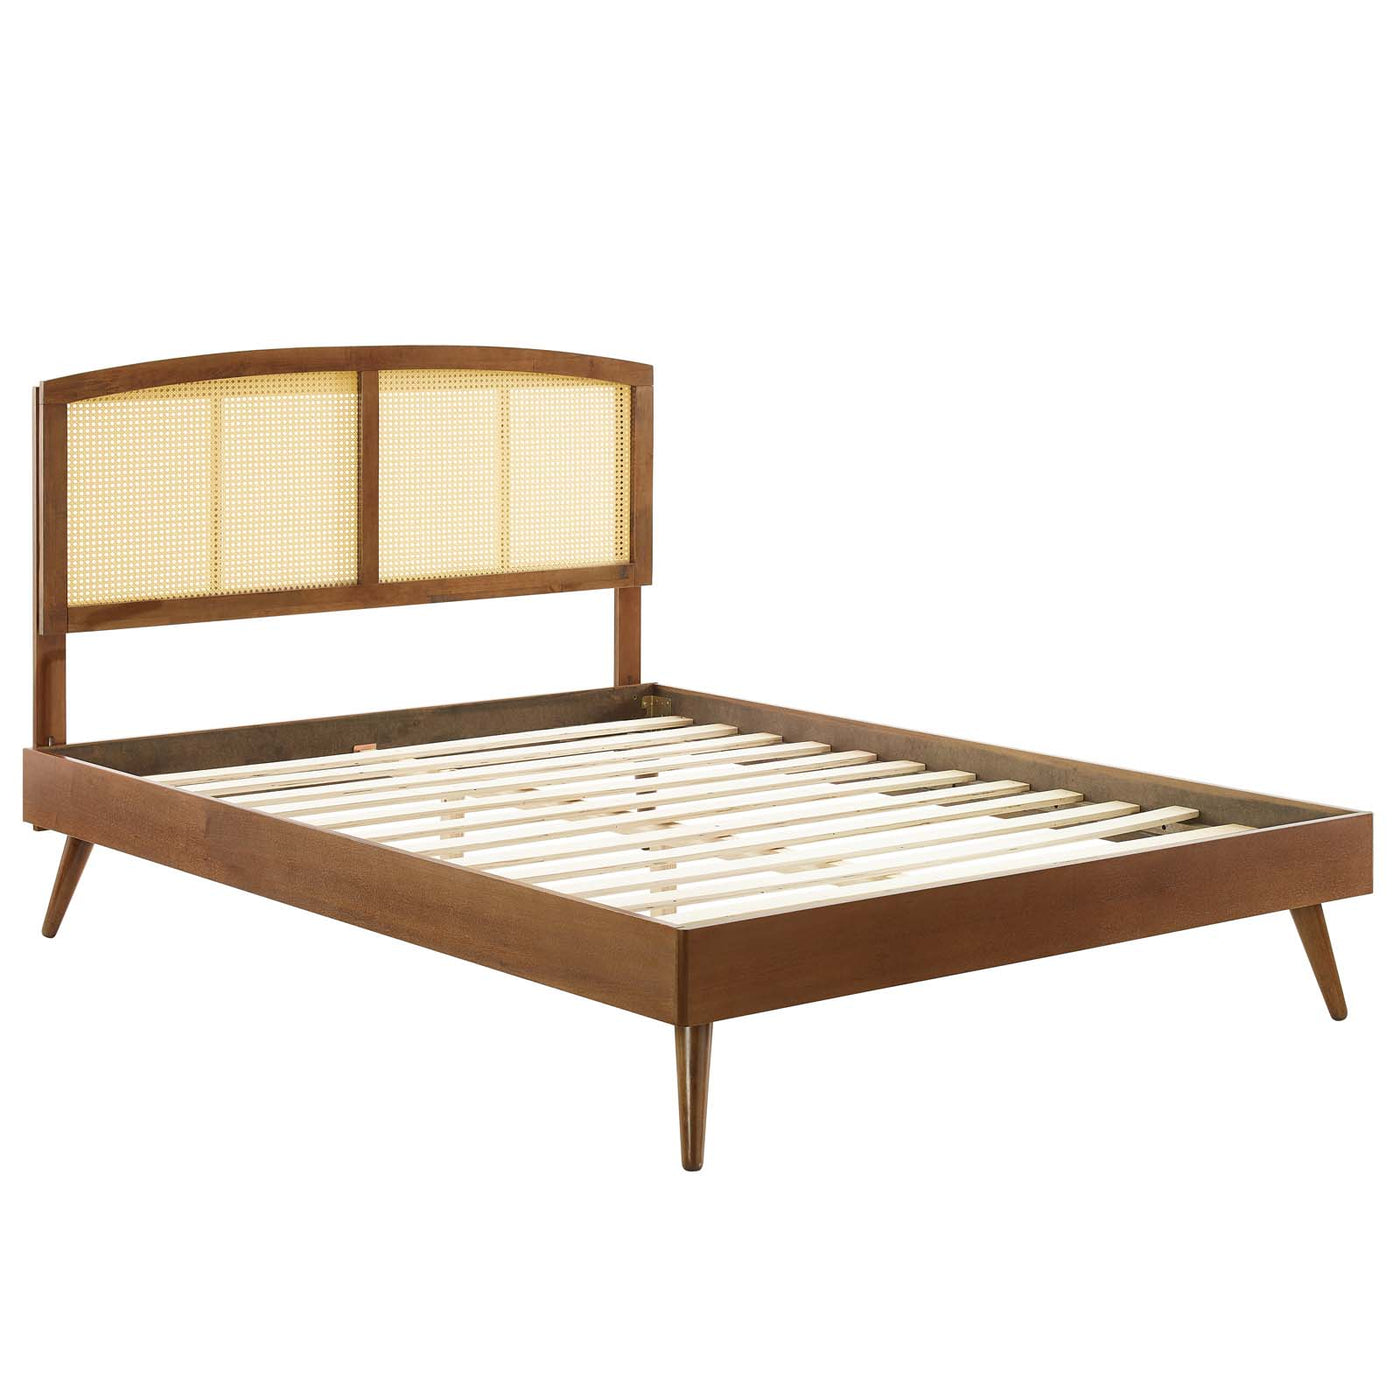 Sierra Cane and Wood Queen Platform Bed With Splayed Legs